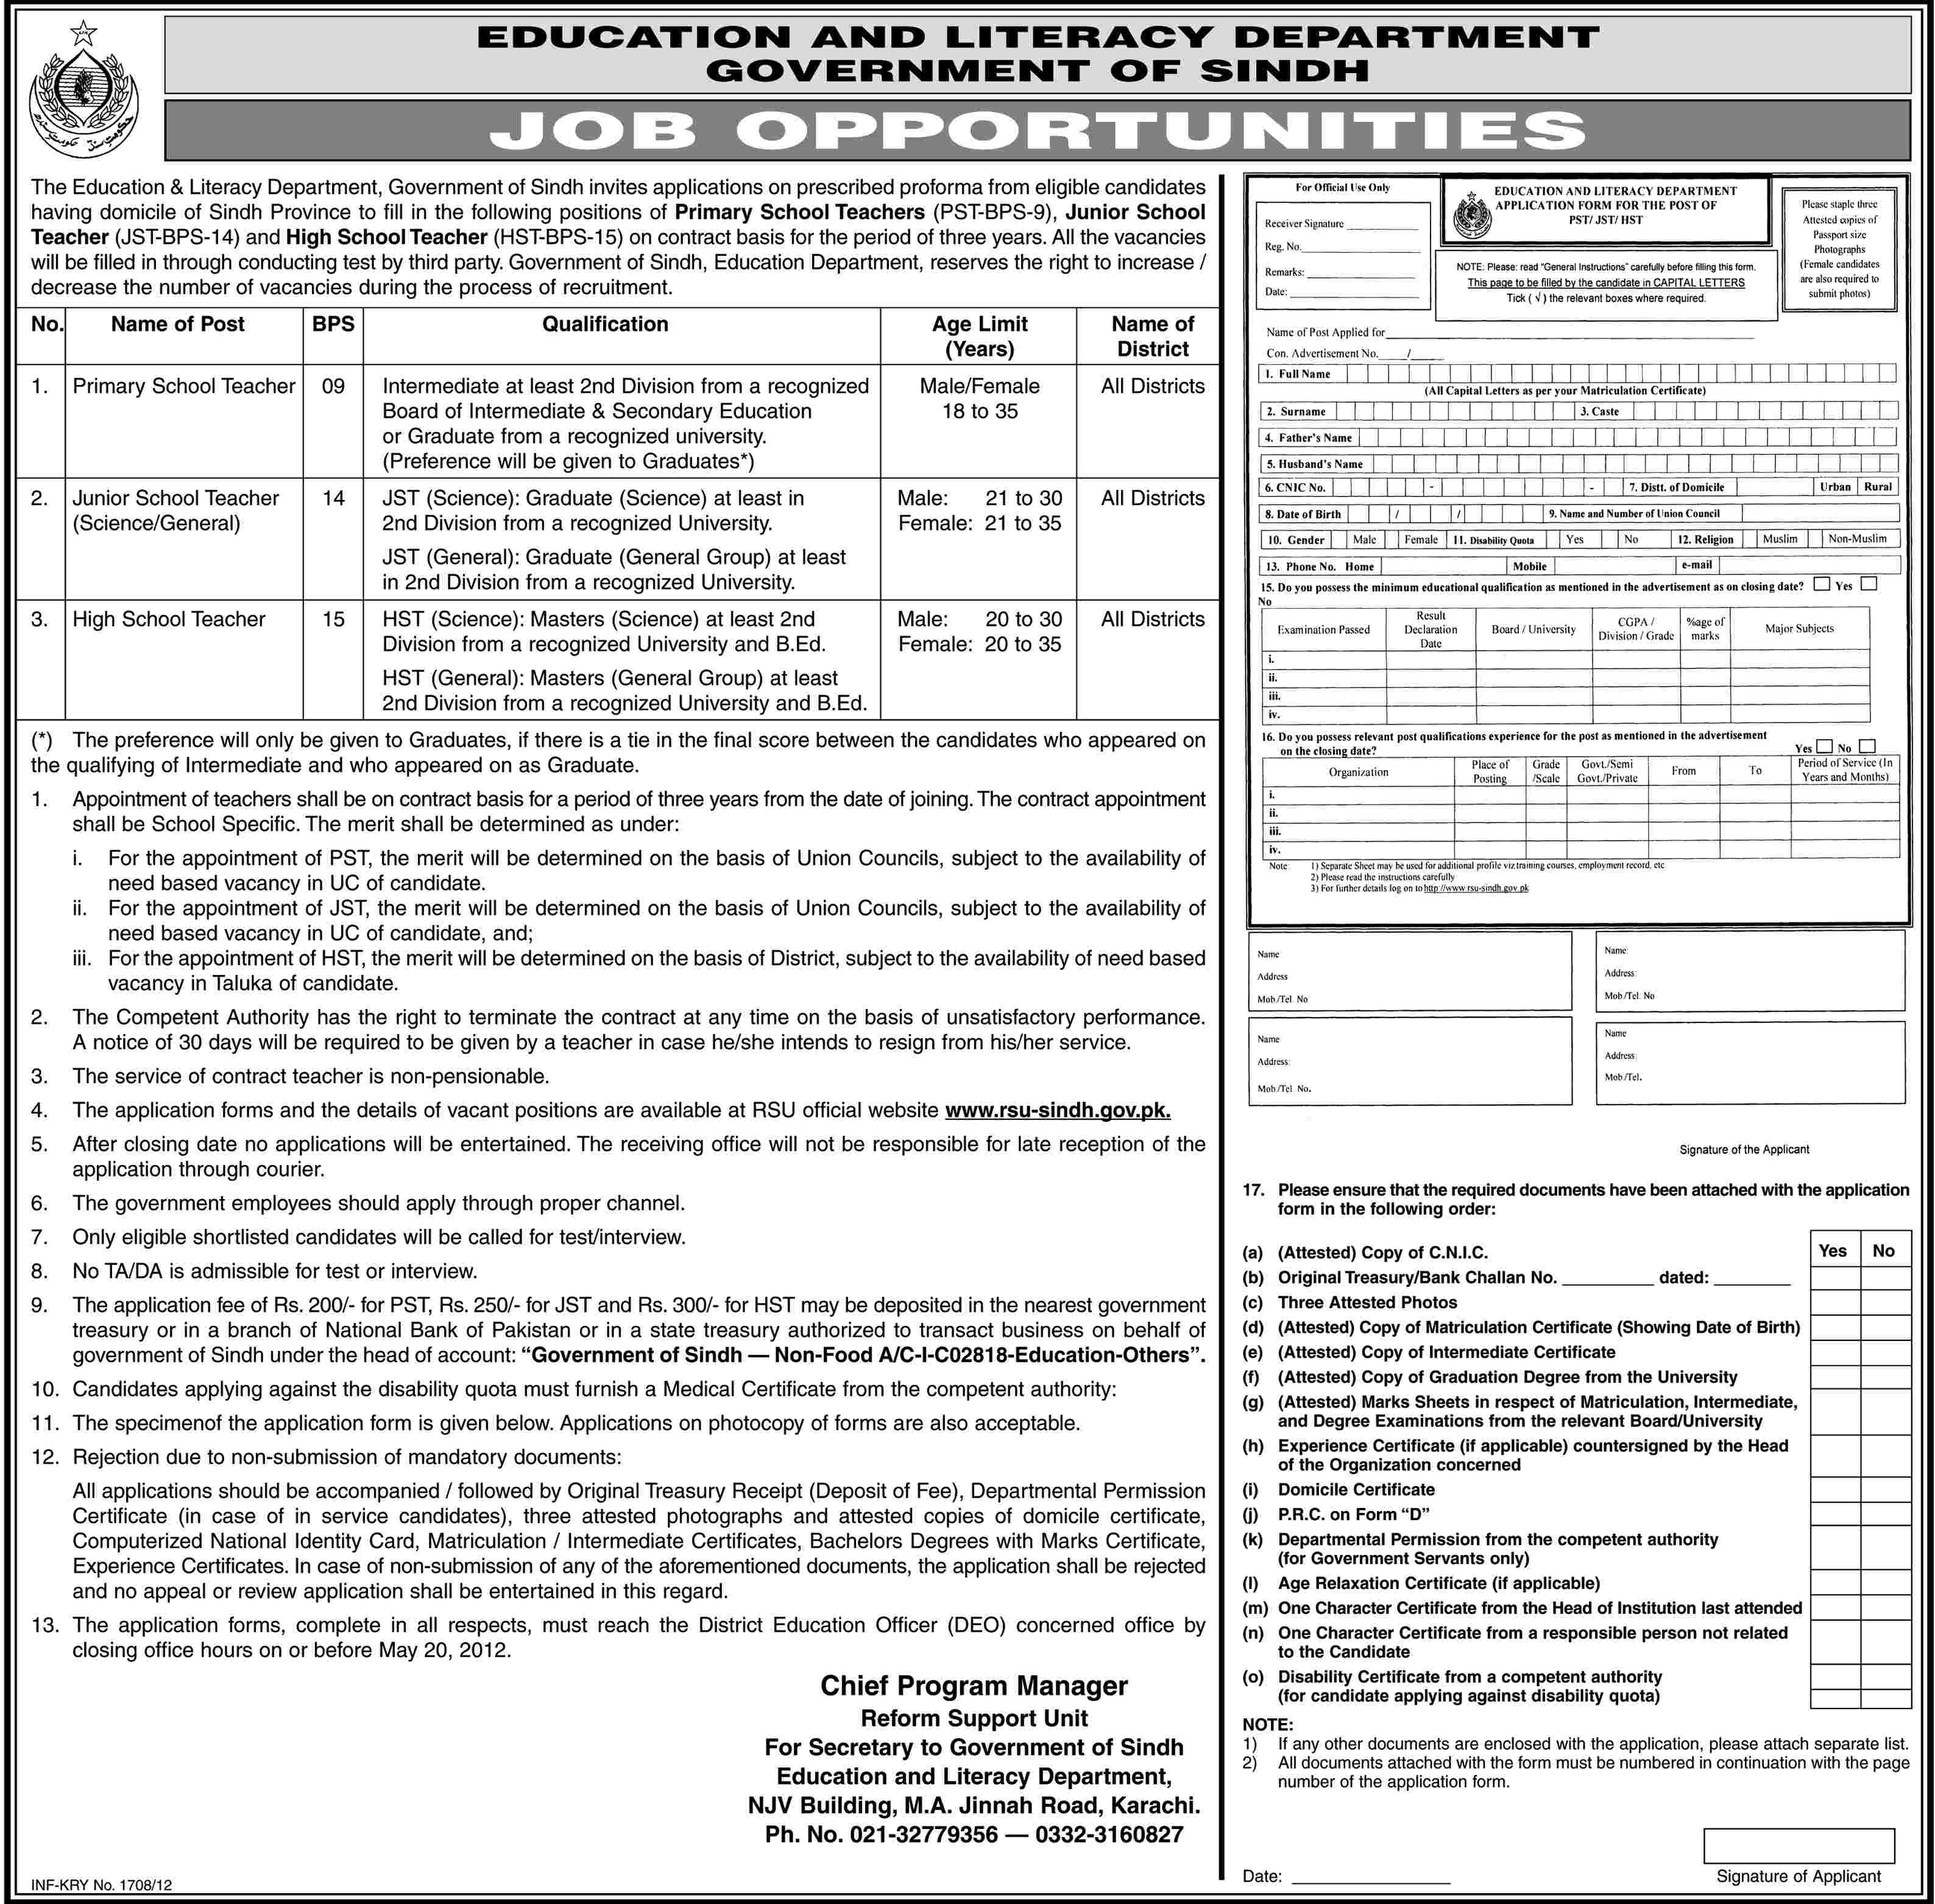 Education and Literacy Department, Government of Sindh Jobs